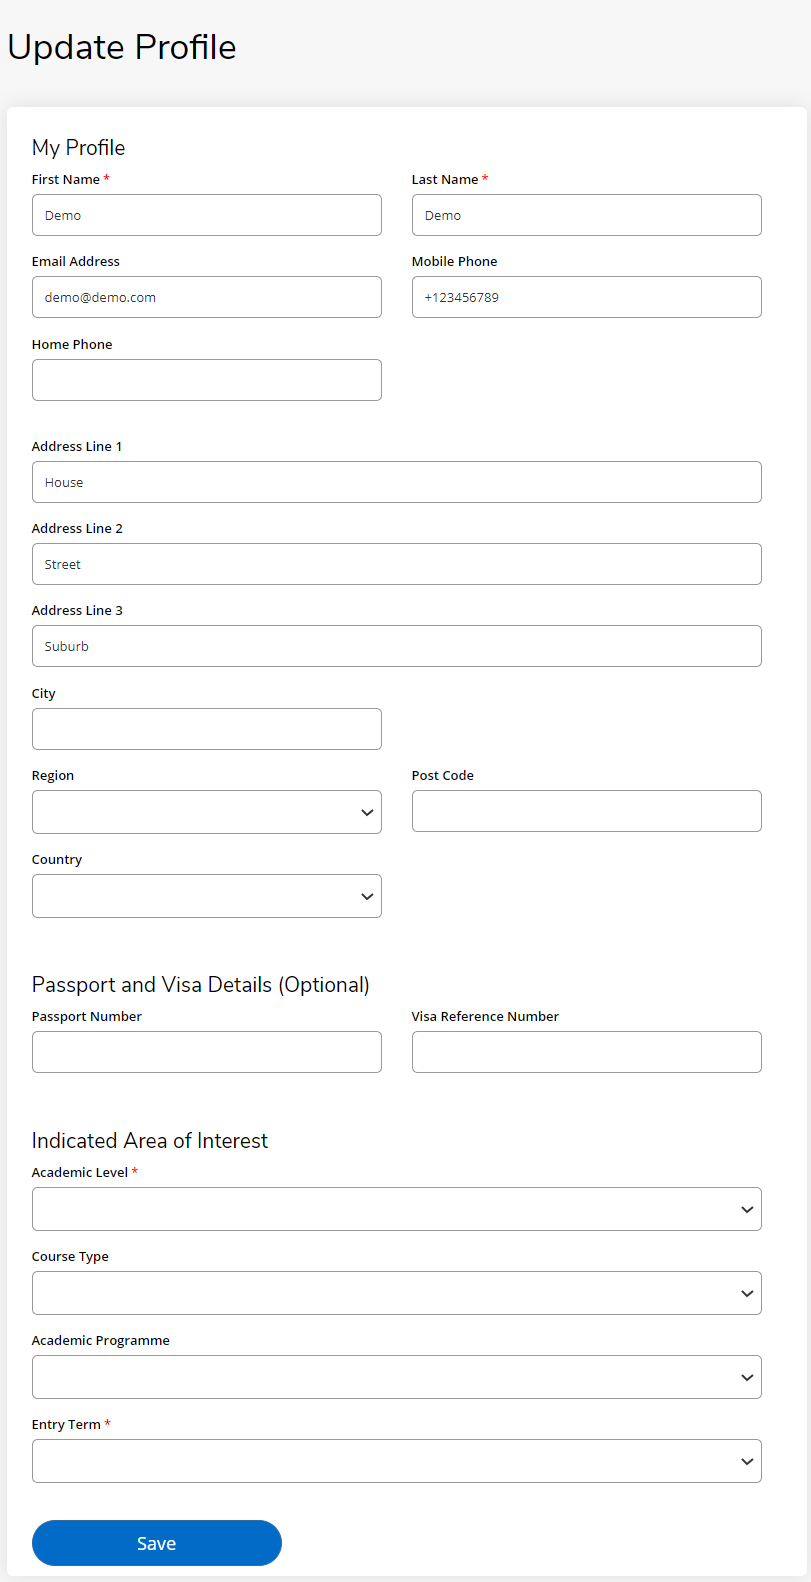 Form with fields that can be edited to include personal details such as name, email, cell number, address